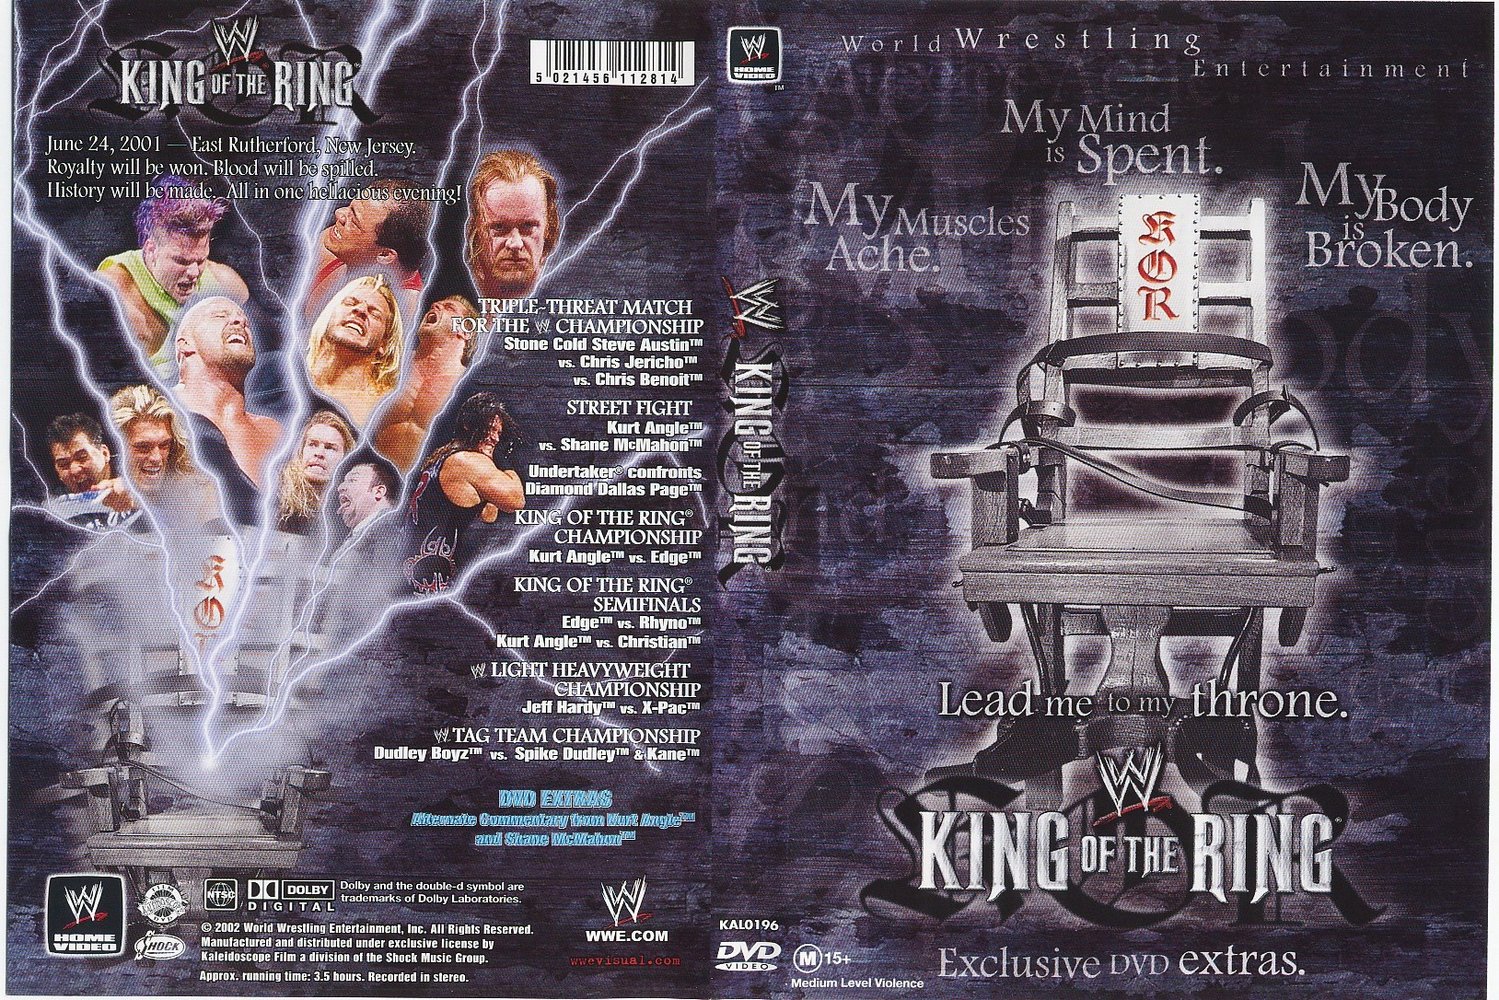 Jaquette DVD WWE King Of The Ring June 2001